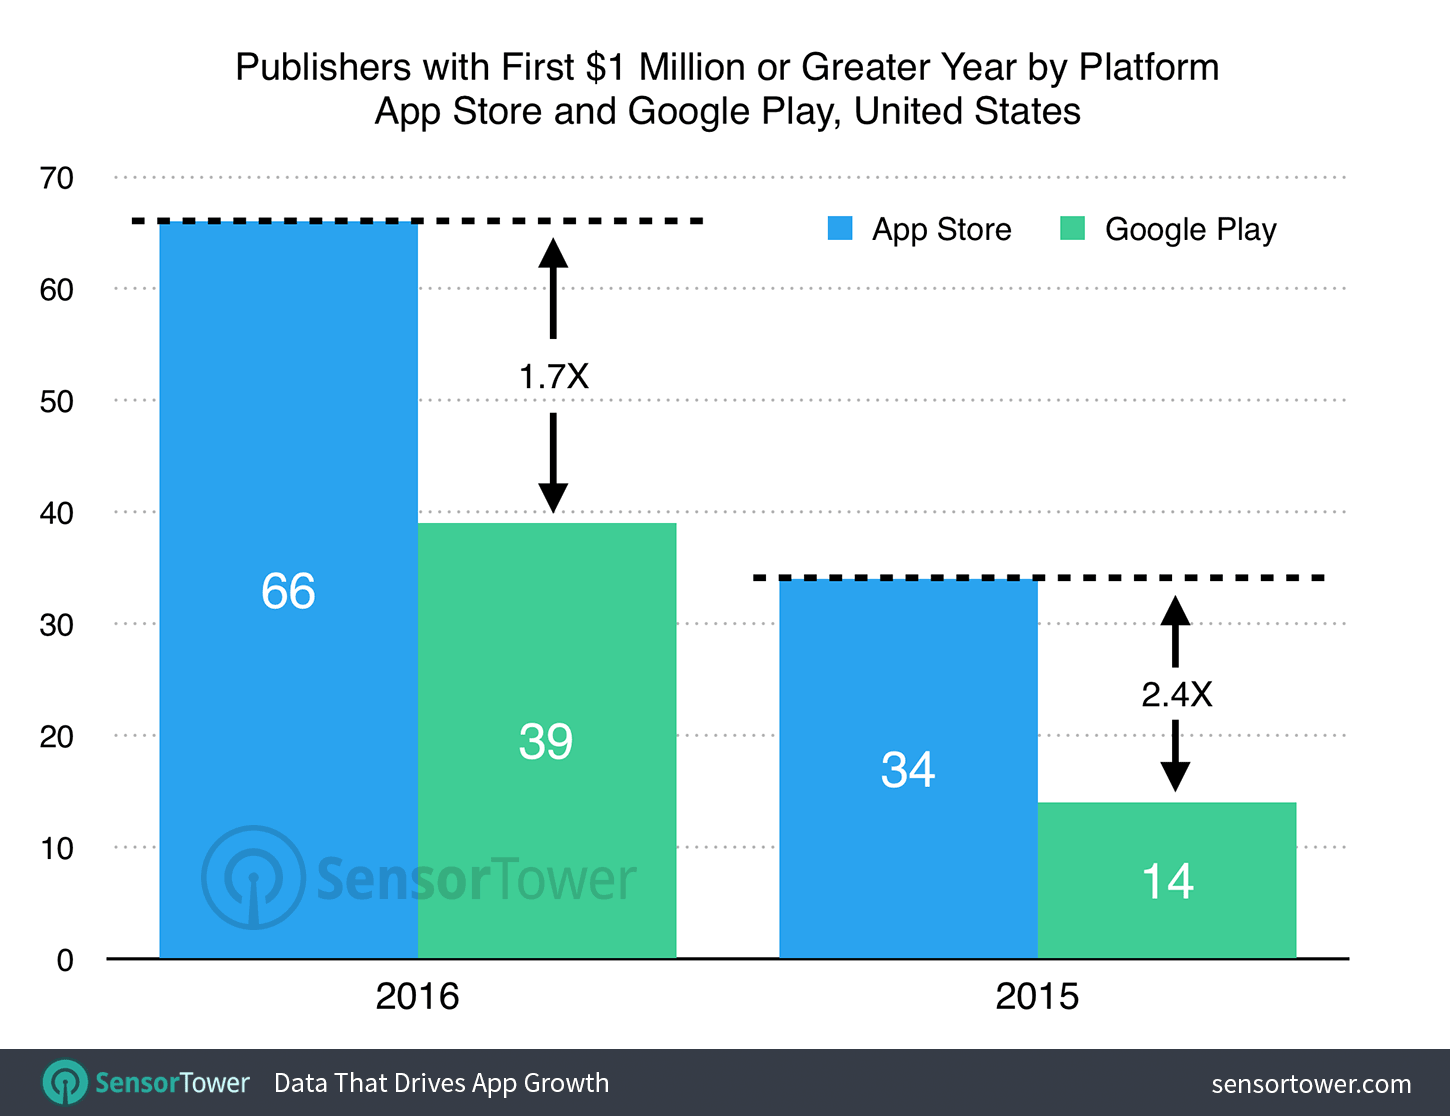 Comparison of the number of million-dollar plus publishers on the App Store and Google Play in 2016